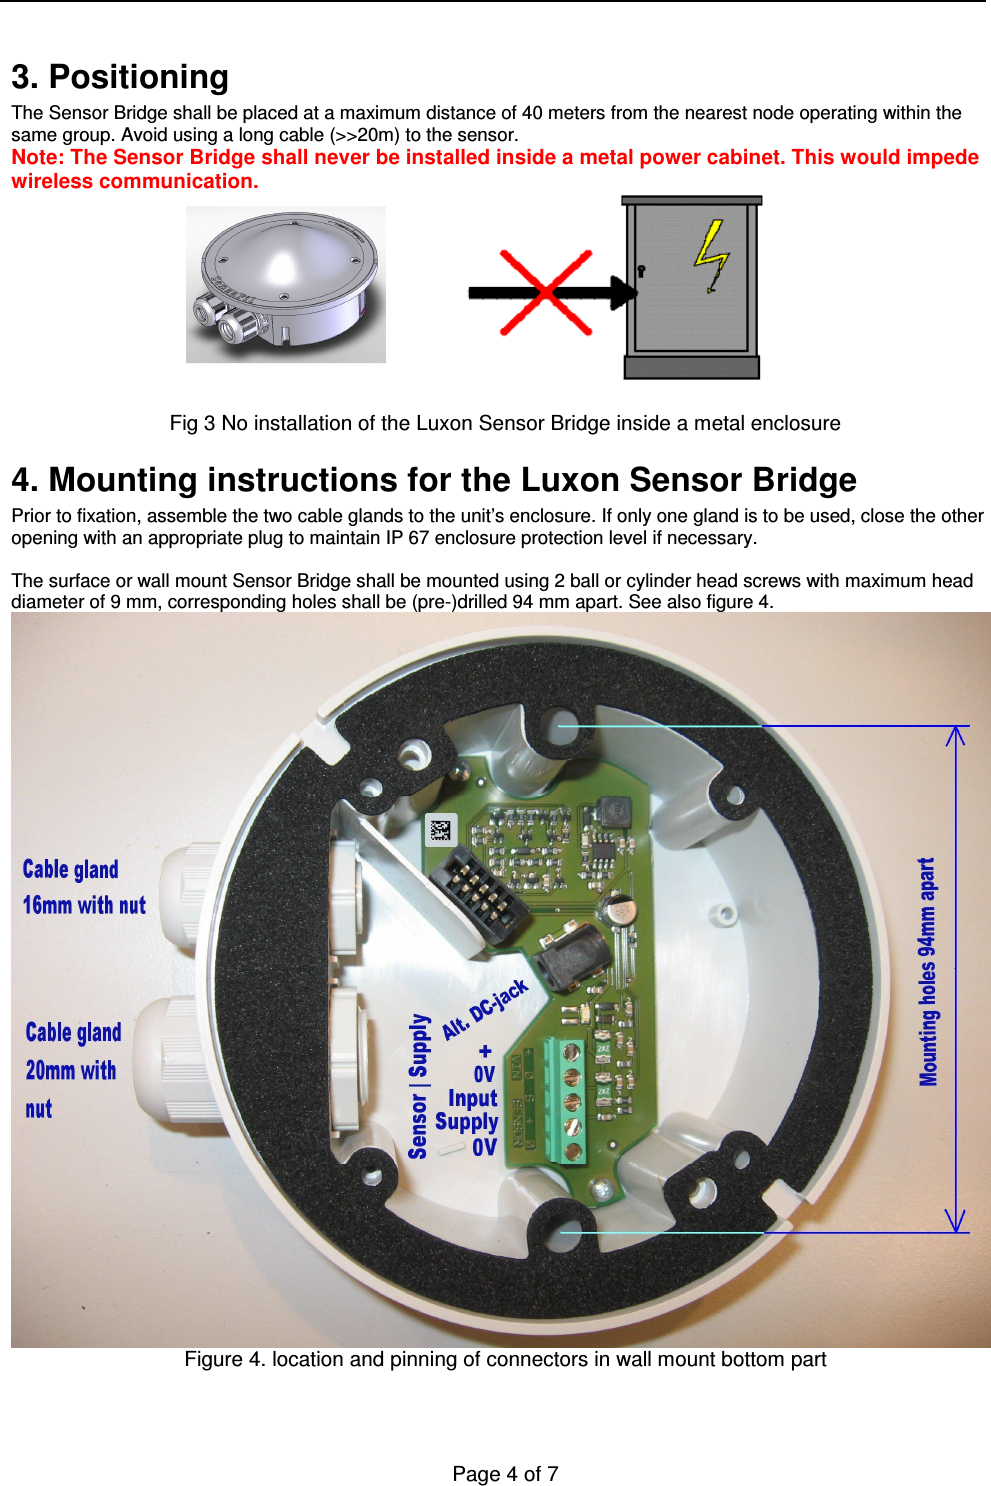   Page 4 of 7    3. Positioning The Sensor Bridge shall be placed at a maximum distance of 40 meters from the nearest node operating within the same group. Avoid using a long cable (&gt;&gt;20m) to the sensor. Note: The Sensor Bridge shall never be installed inside a metal power cabinet. This would impede wireless communication.           Fig 3 No installation of the Luxon Sensor Bridge inside a metal enclosure 4. Mounting instructions for the Luxon Sensor Bridge  Prior to fixation, assemble the two cable glands to the unit’s enclosure. If only one gland is to be used, close the other opening with an appropriate plug to maintain IP 67 enclosure protection level if necessary.  The surface or wall mount Sensor Bridge shall be mounted using 2 ball or cylinder head screws with maximum head diameter of 9 mm, corresponding holes shall be (pre-)drilled 94 mm apart. See also figure 4.  Figure 4. location and pinning of connectors in wall mount bottom part    